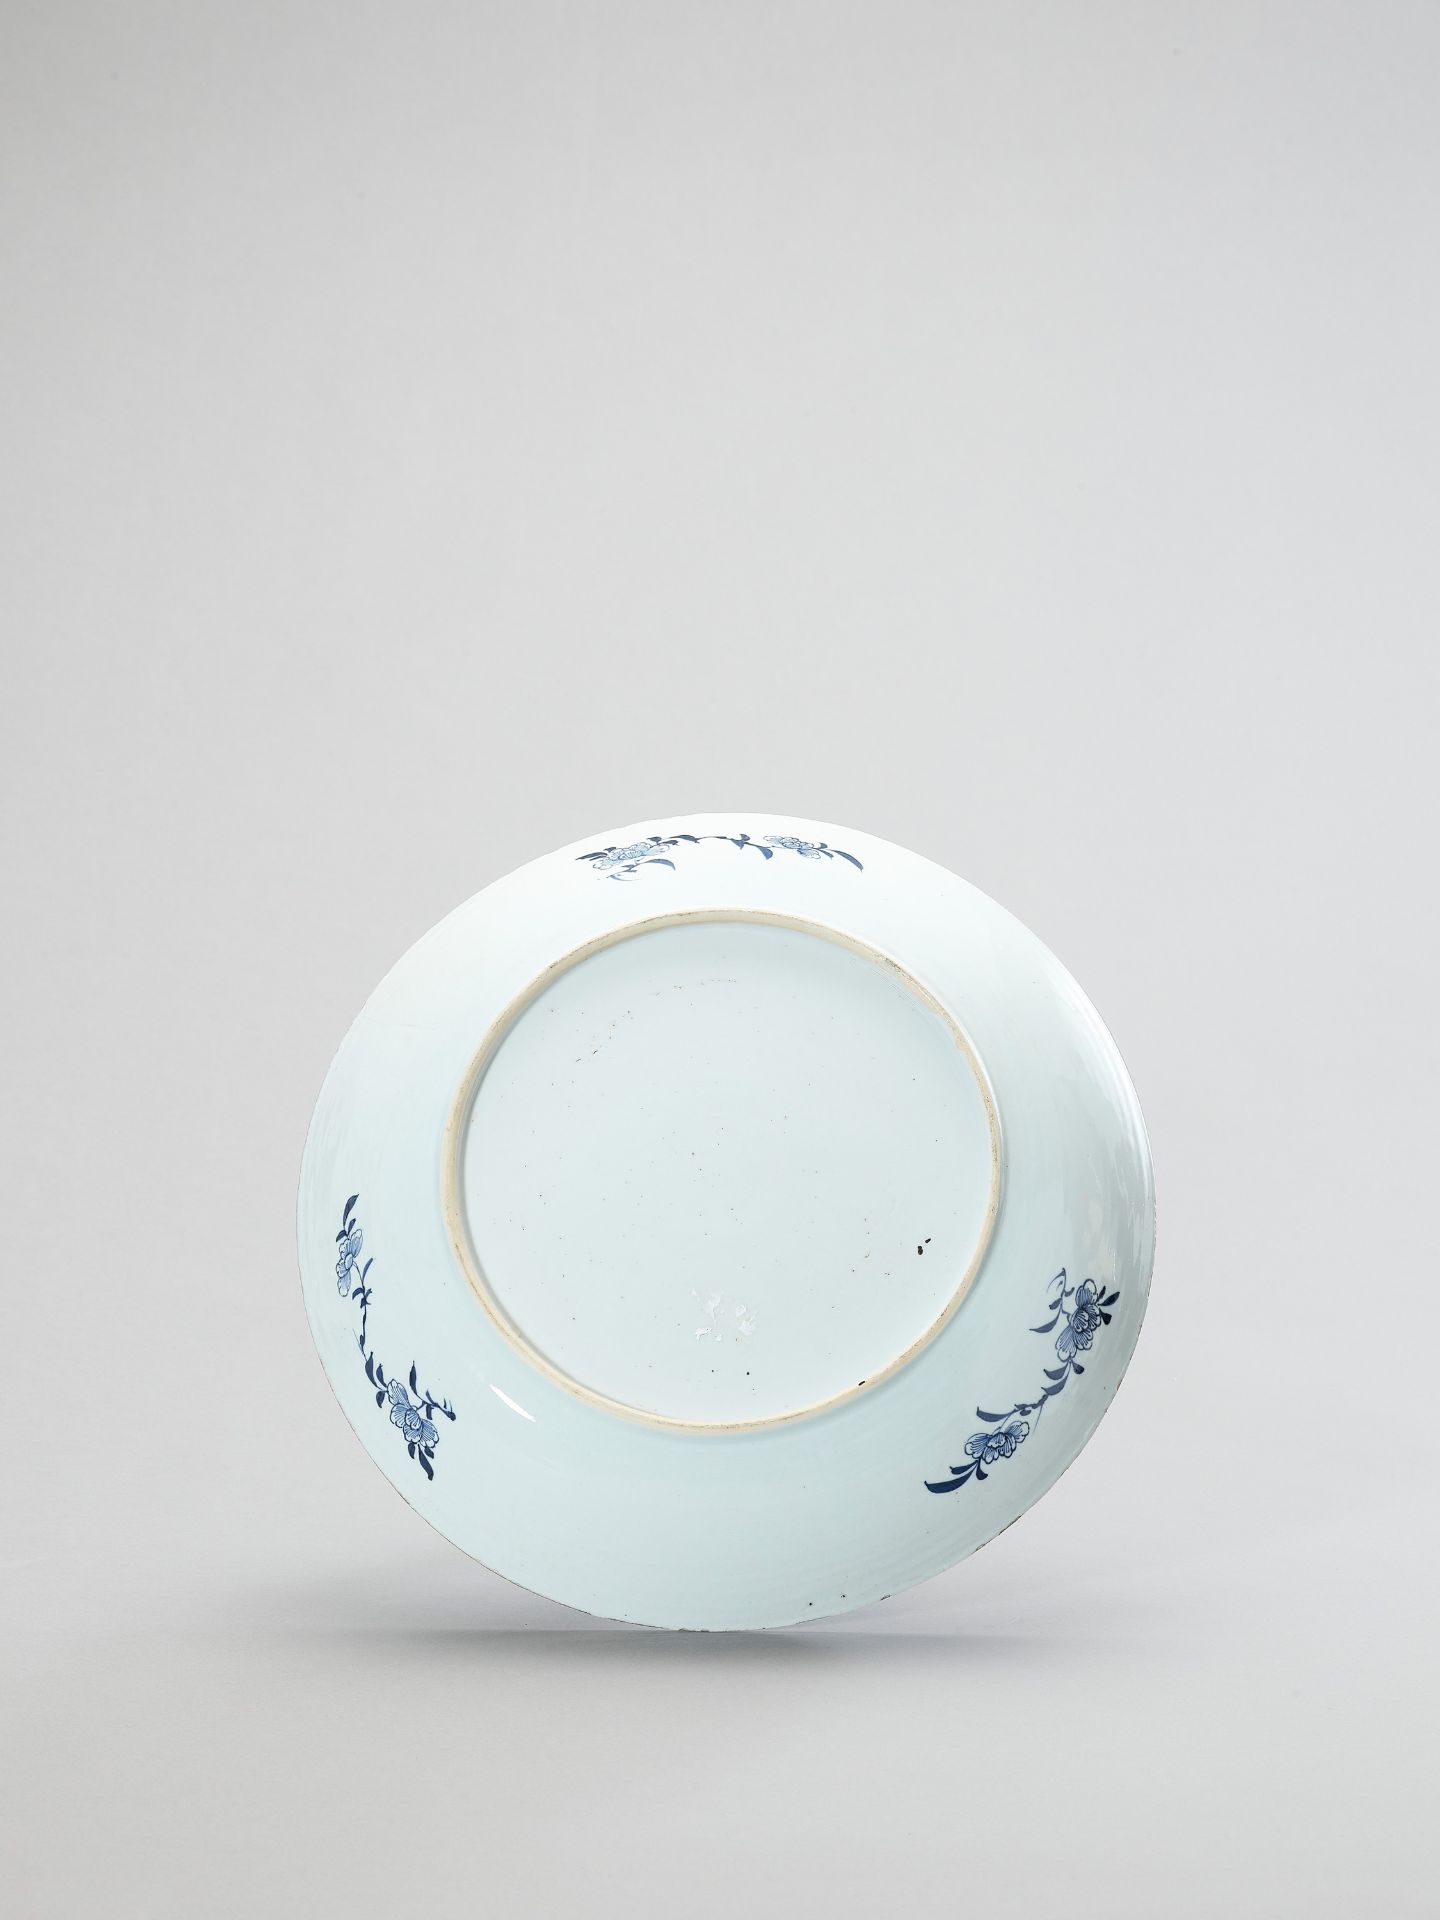 A LARGE BLUE AND WHITE PORCELAIN CHARGER - Image 3 of 4